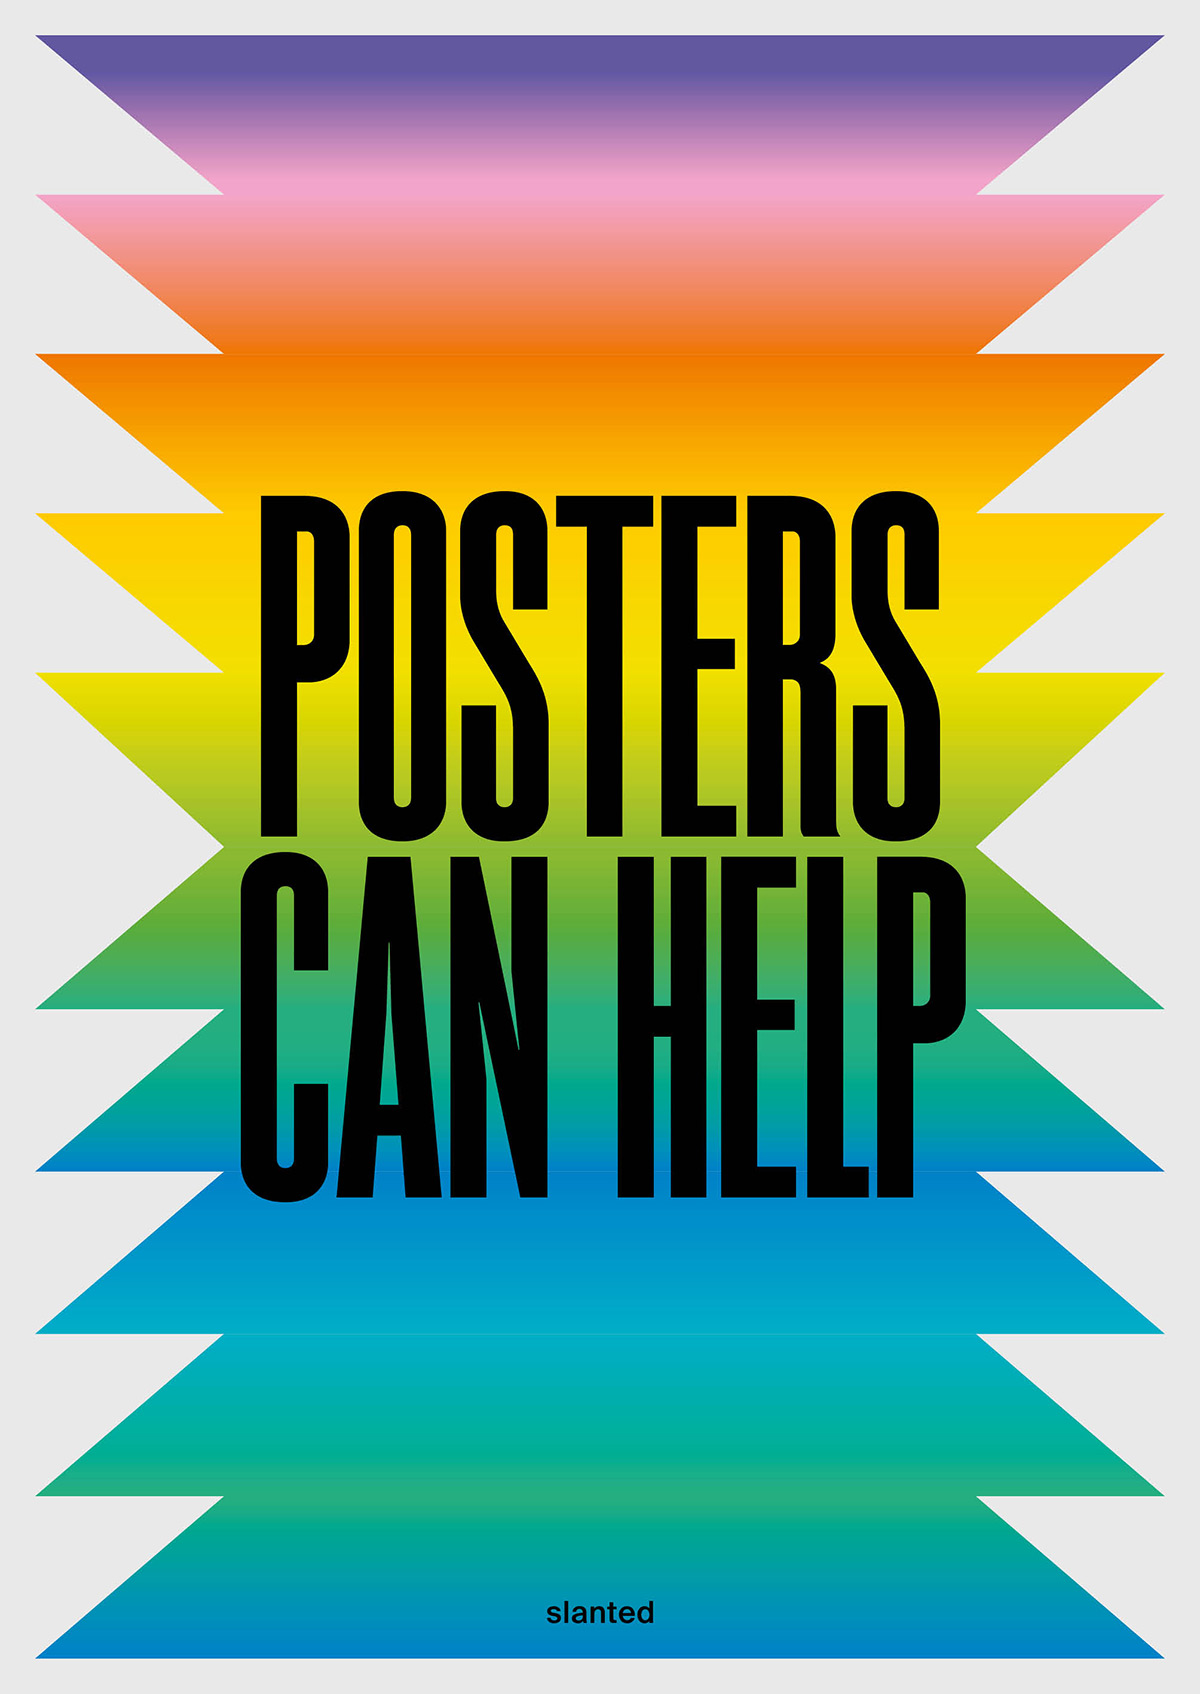 Poster Printing: Making A New Trend